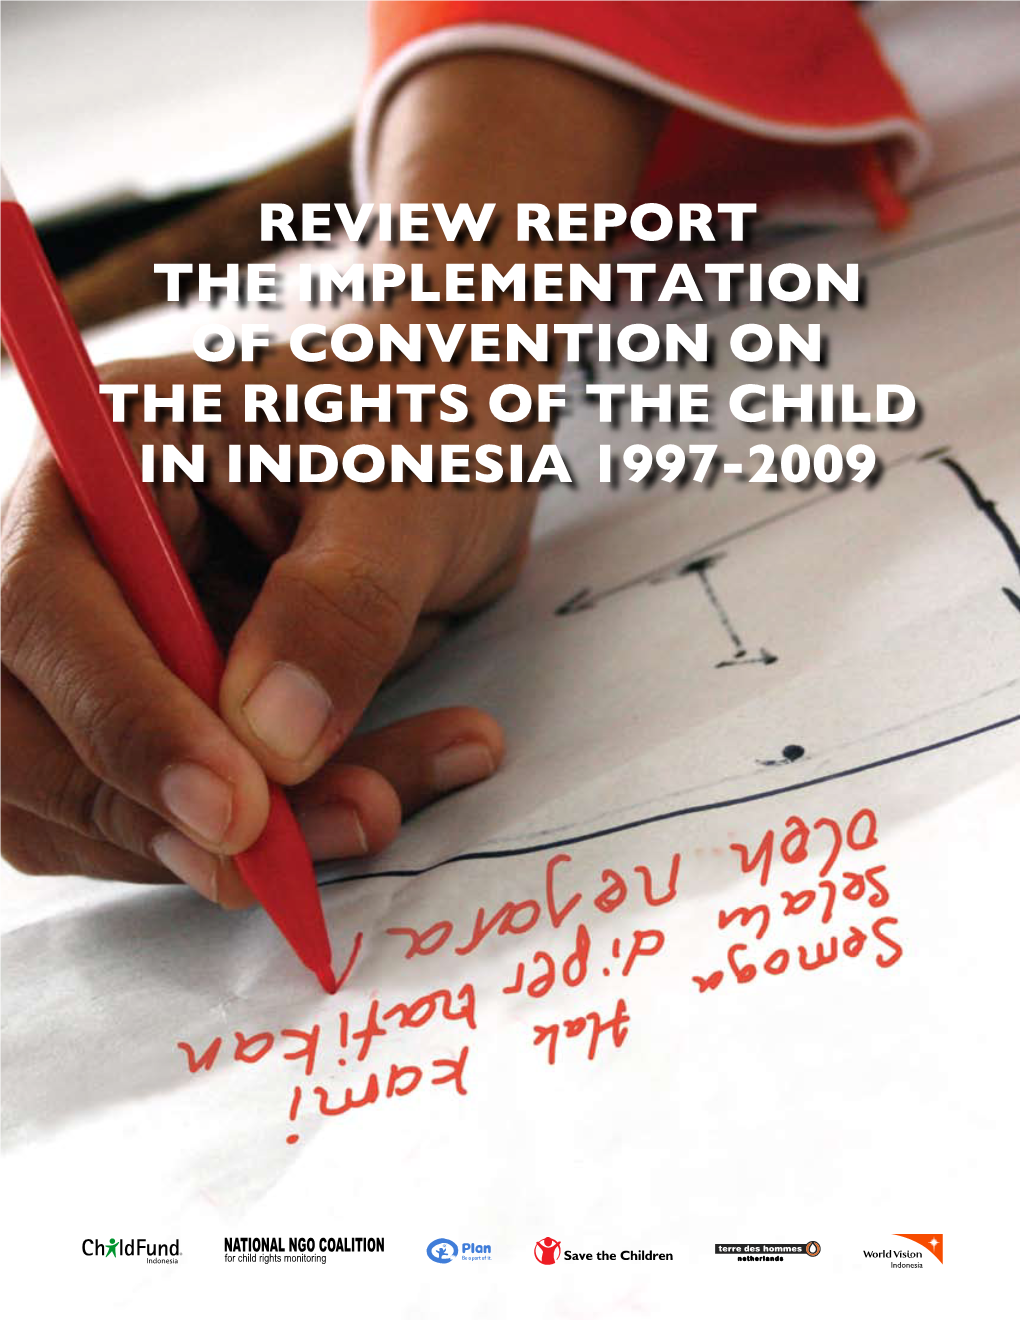 Review Report the Implementation of Convention on the Rights of the Child in Indonesia 1997-2009